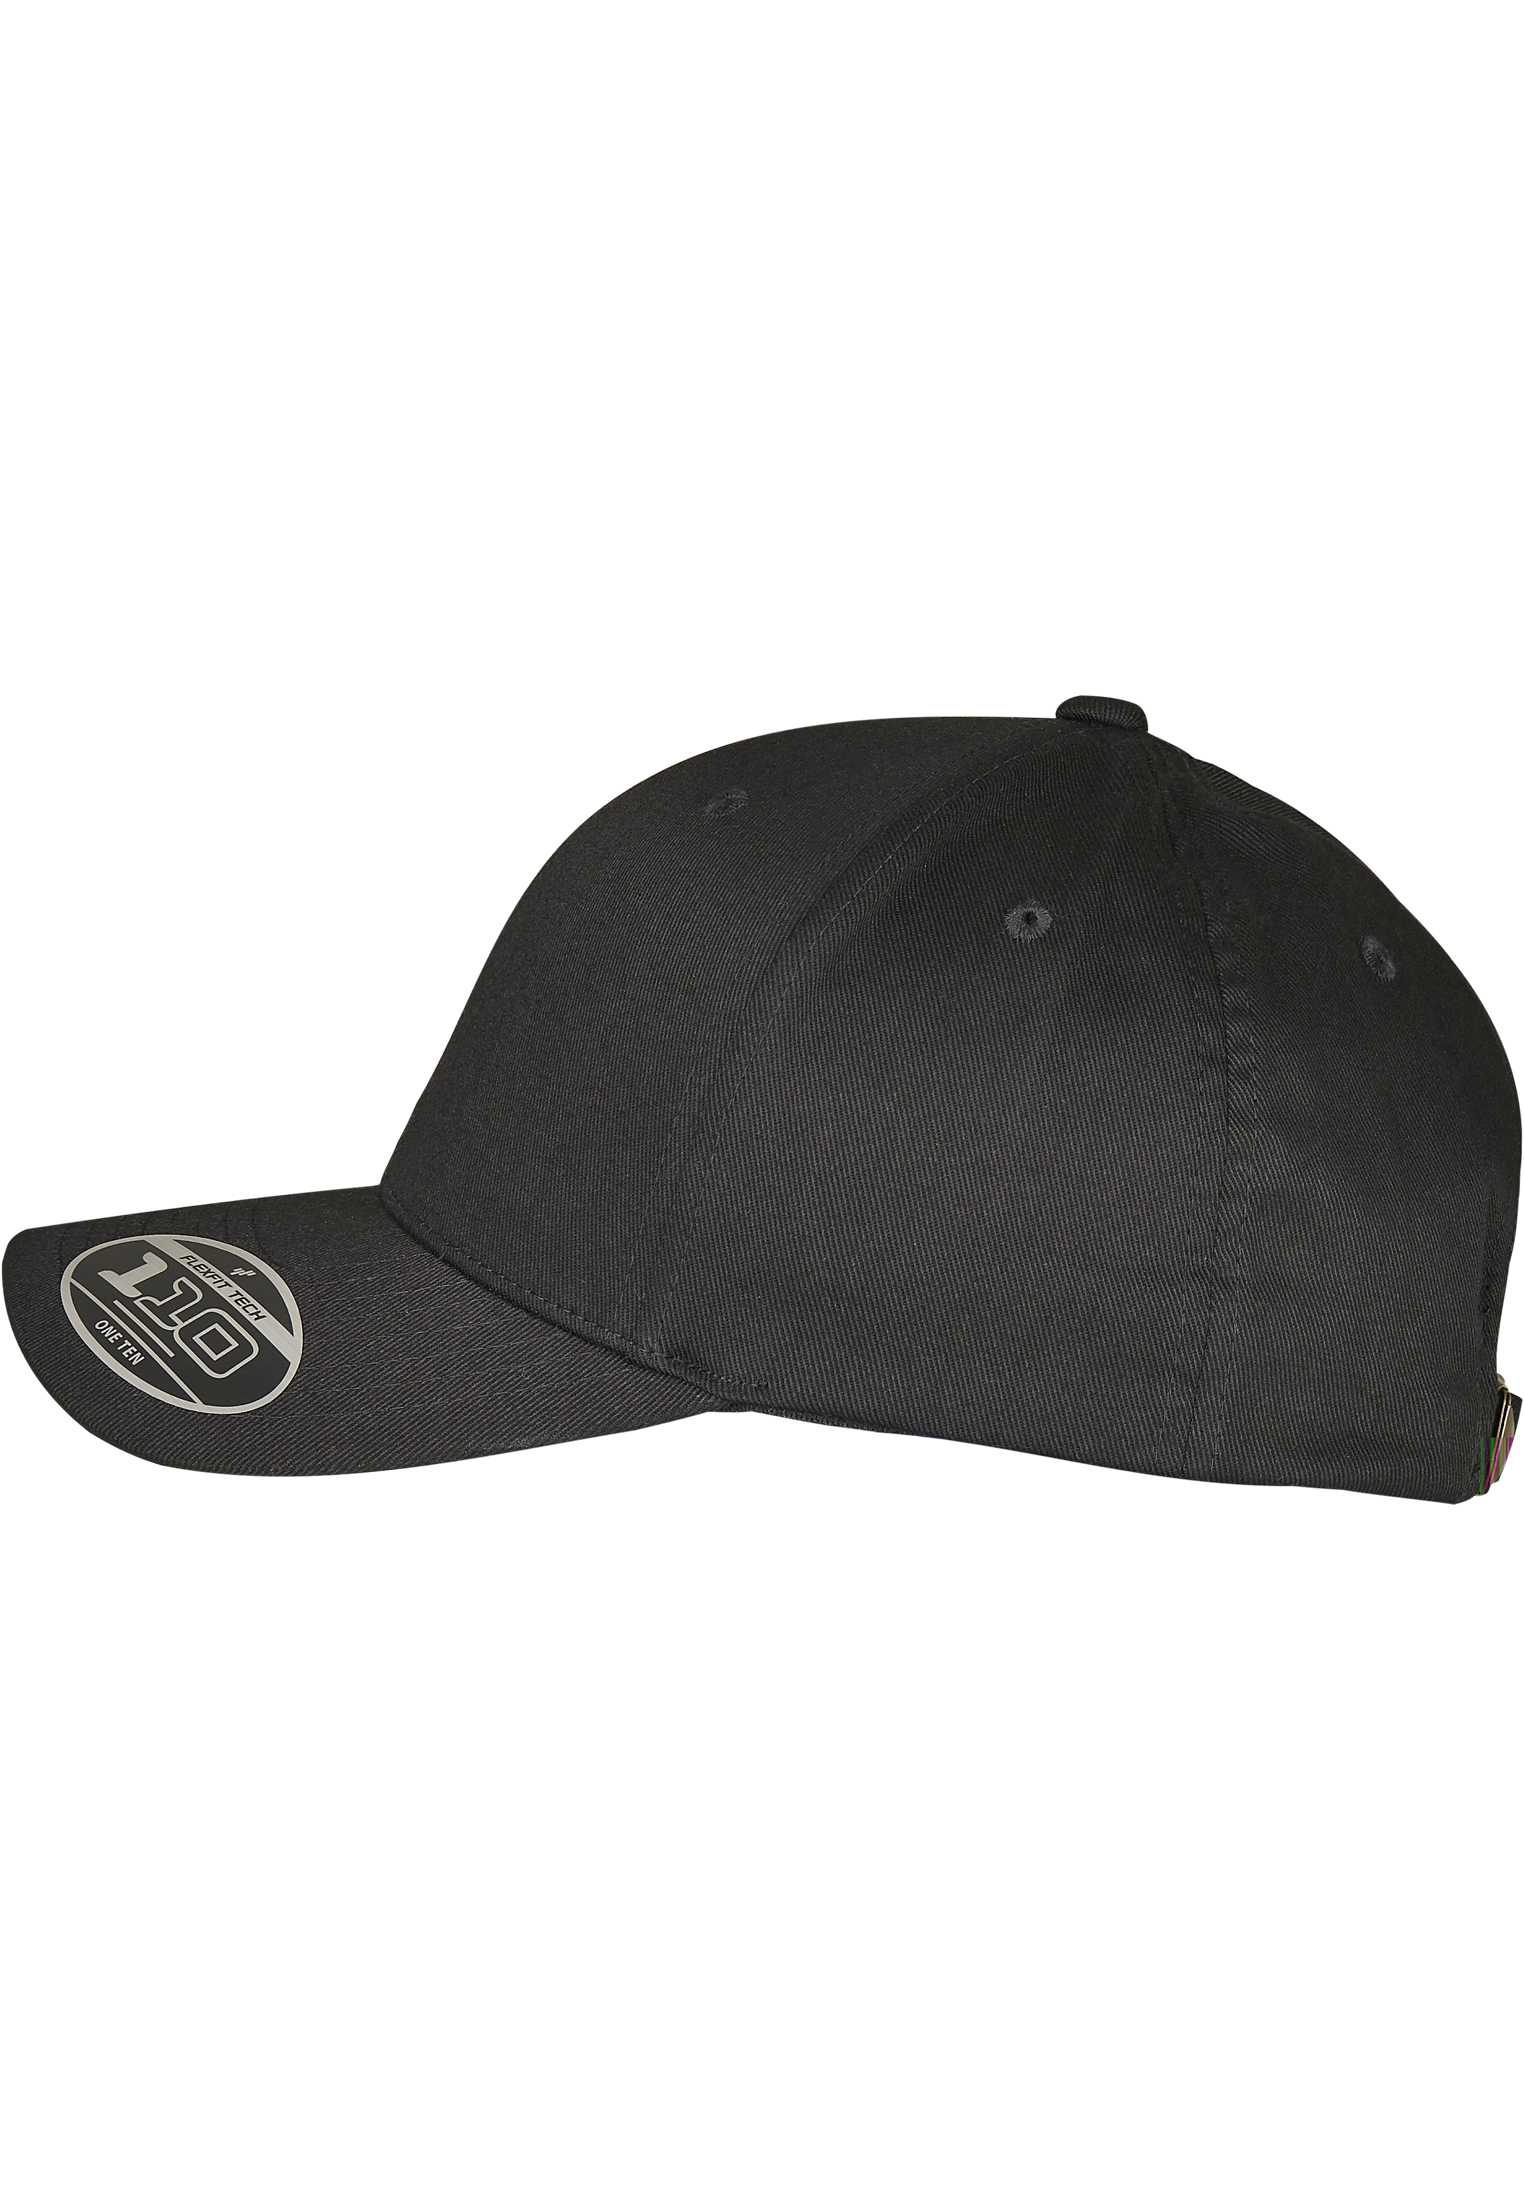 Buy Flexfit WOOLY COMBED Stretchable Cap - black - L/XL at